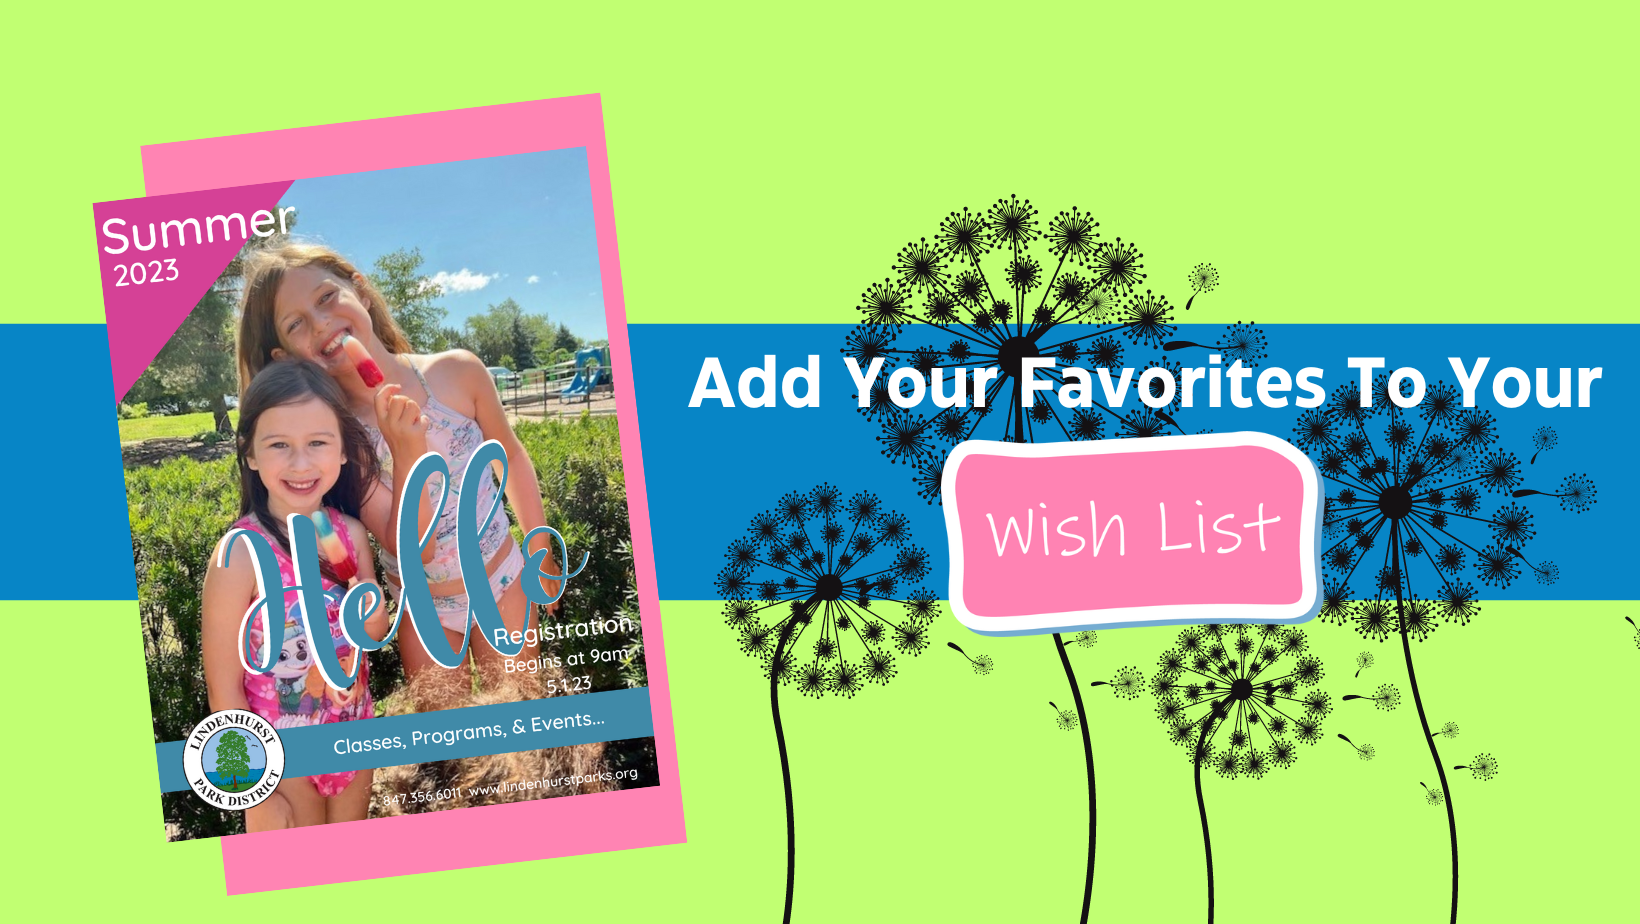 Summer 2023: Add your favorites to your wish list flyer